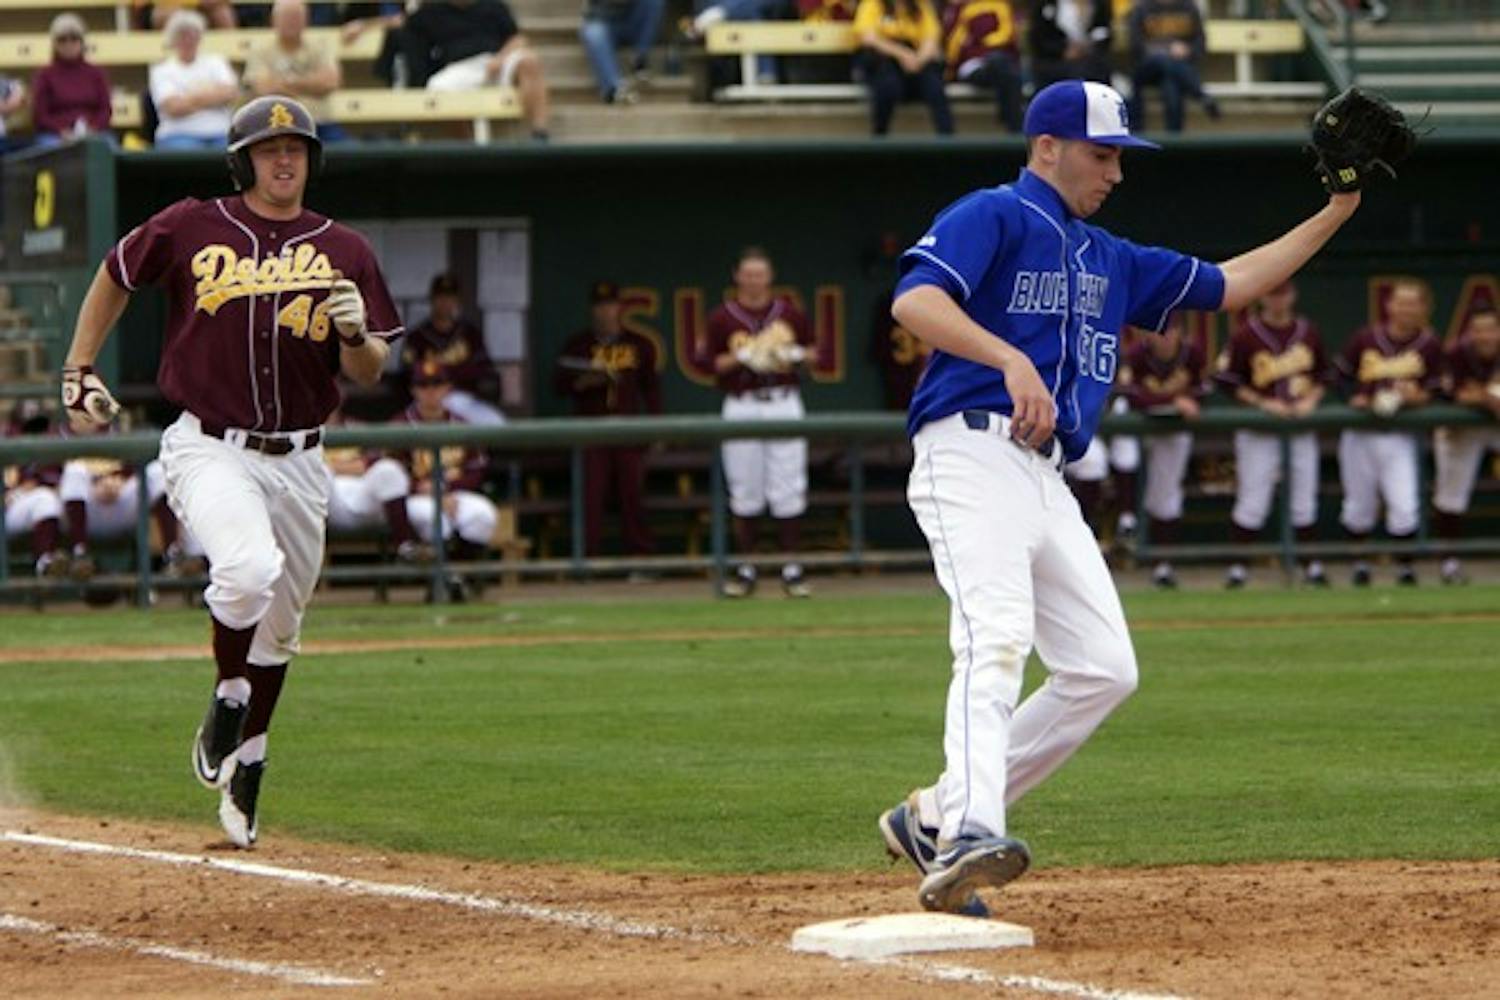 Back on the Base Paths: ASU junior outfielder Andy Workman sprints to first base against Delaware on Feb. 26 in Tempe. It was Workman’s first game back after missing the entire 2010 season with a foot injury. (Photo by Scott Stuk)